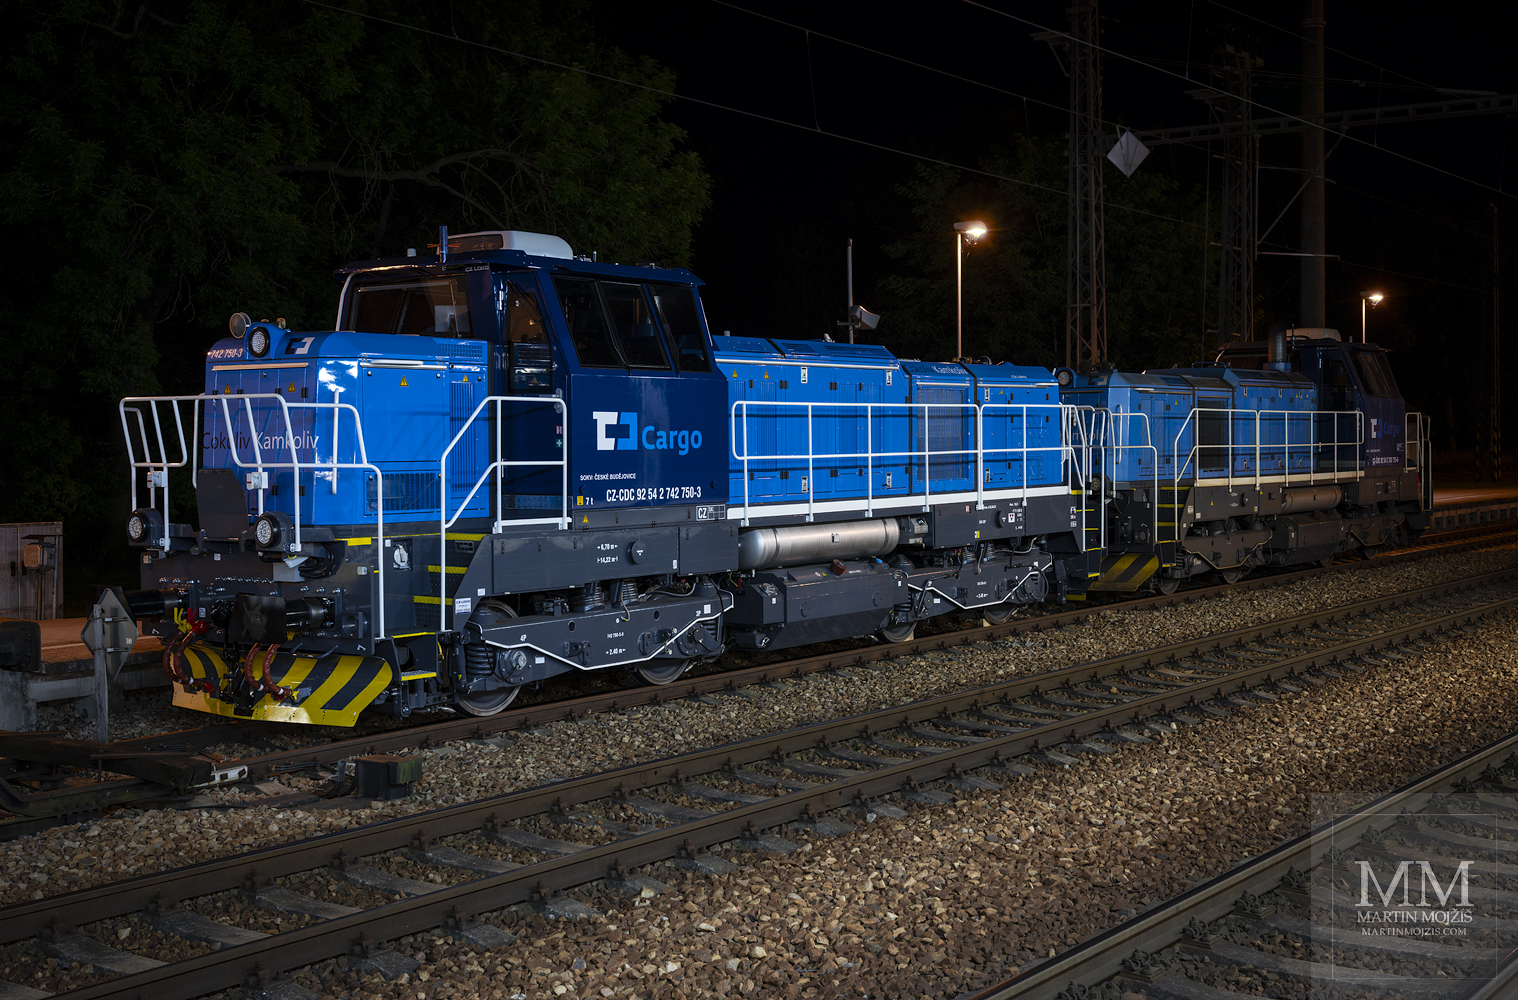 A pair of 742 CD Cargo locomotives, left 742 750-3, right in the background 742 715-6.